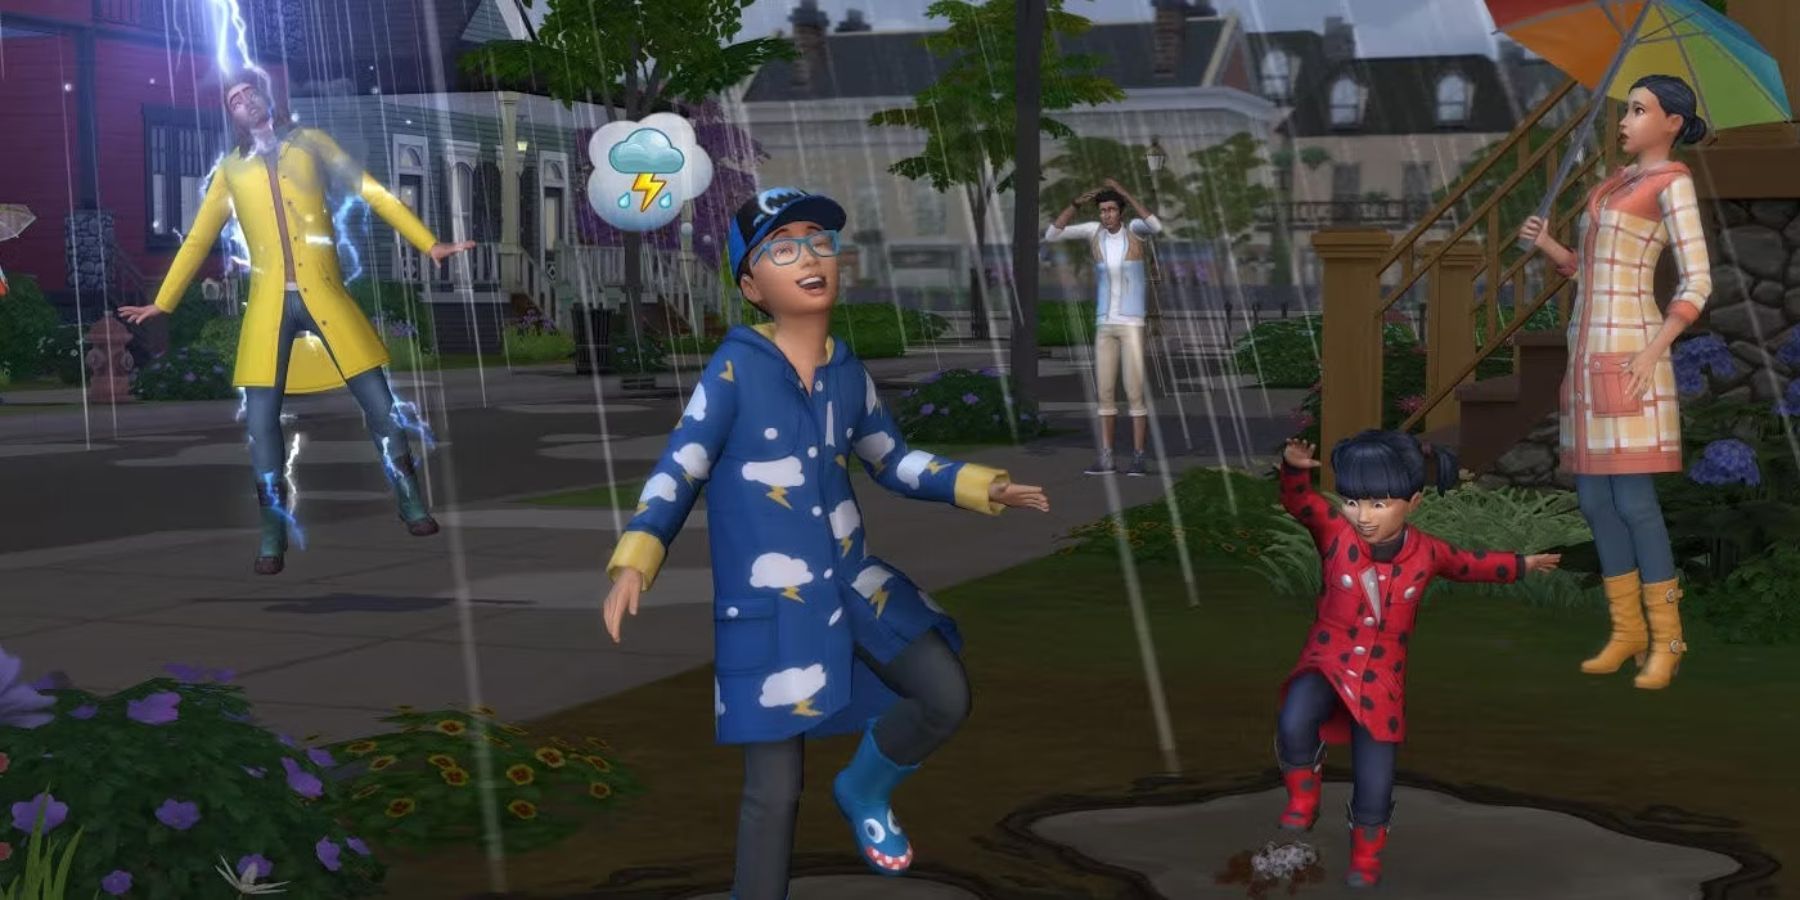 sims playing in rain the sims 4